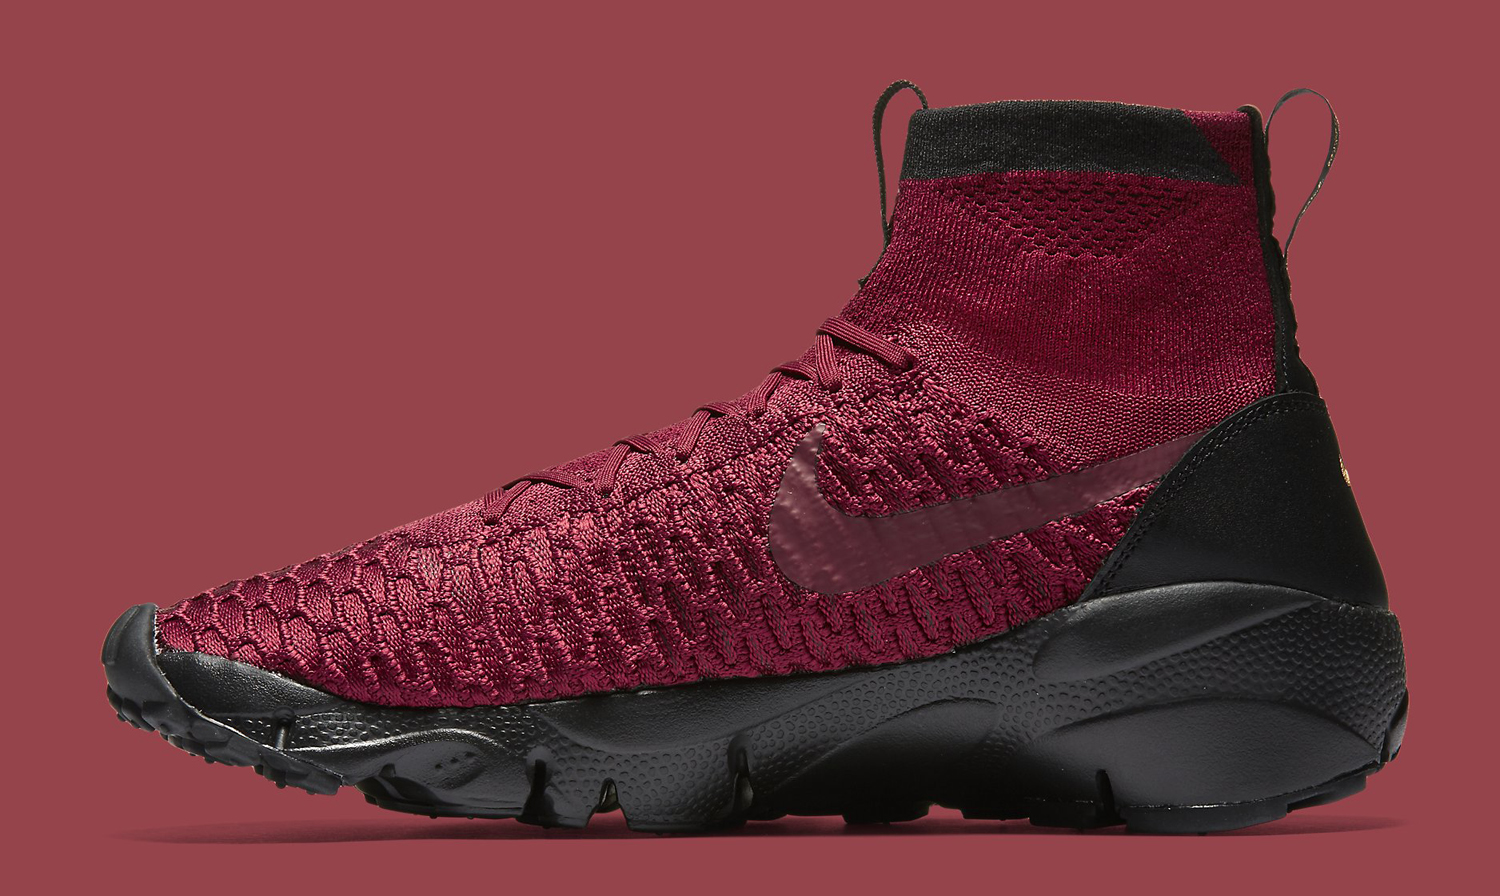 Nike Air Footscape Magista Team Red Black Medial